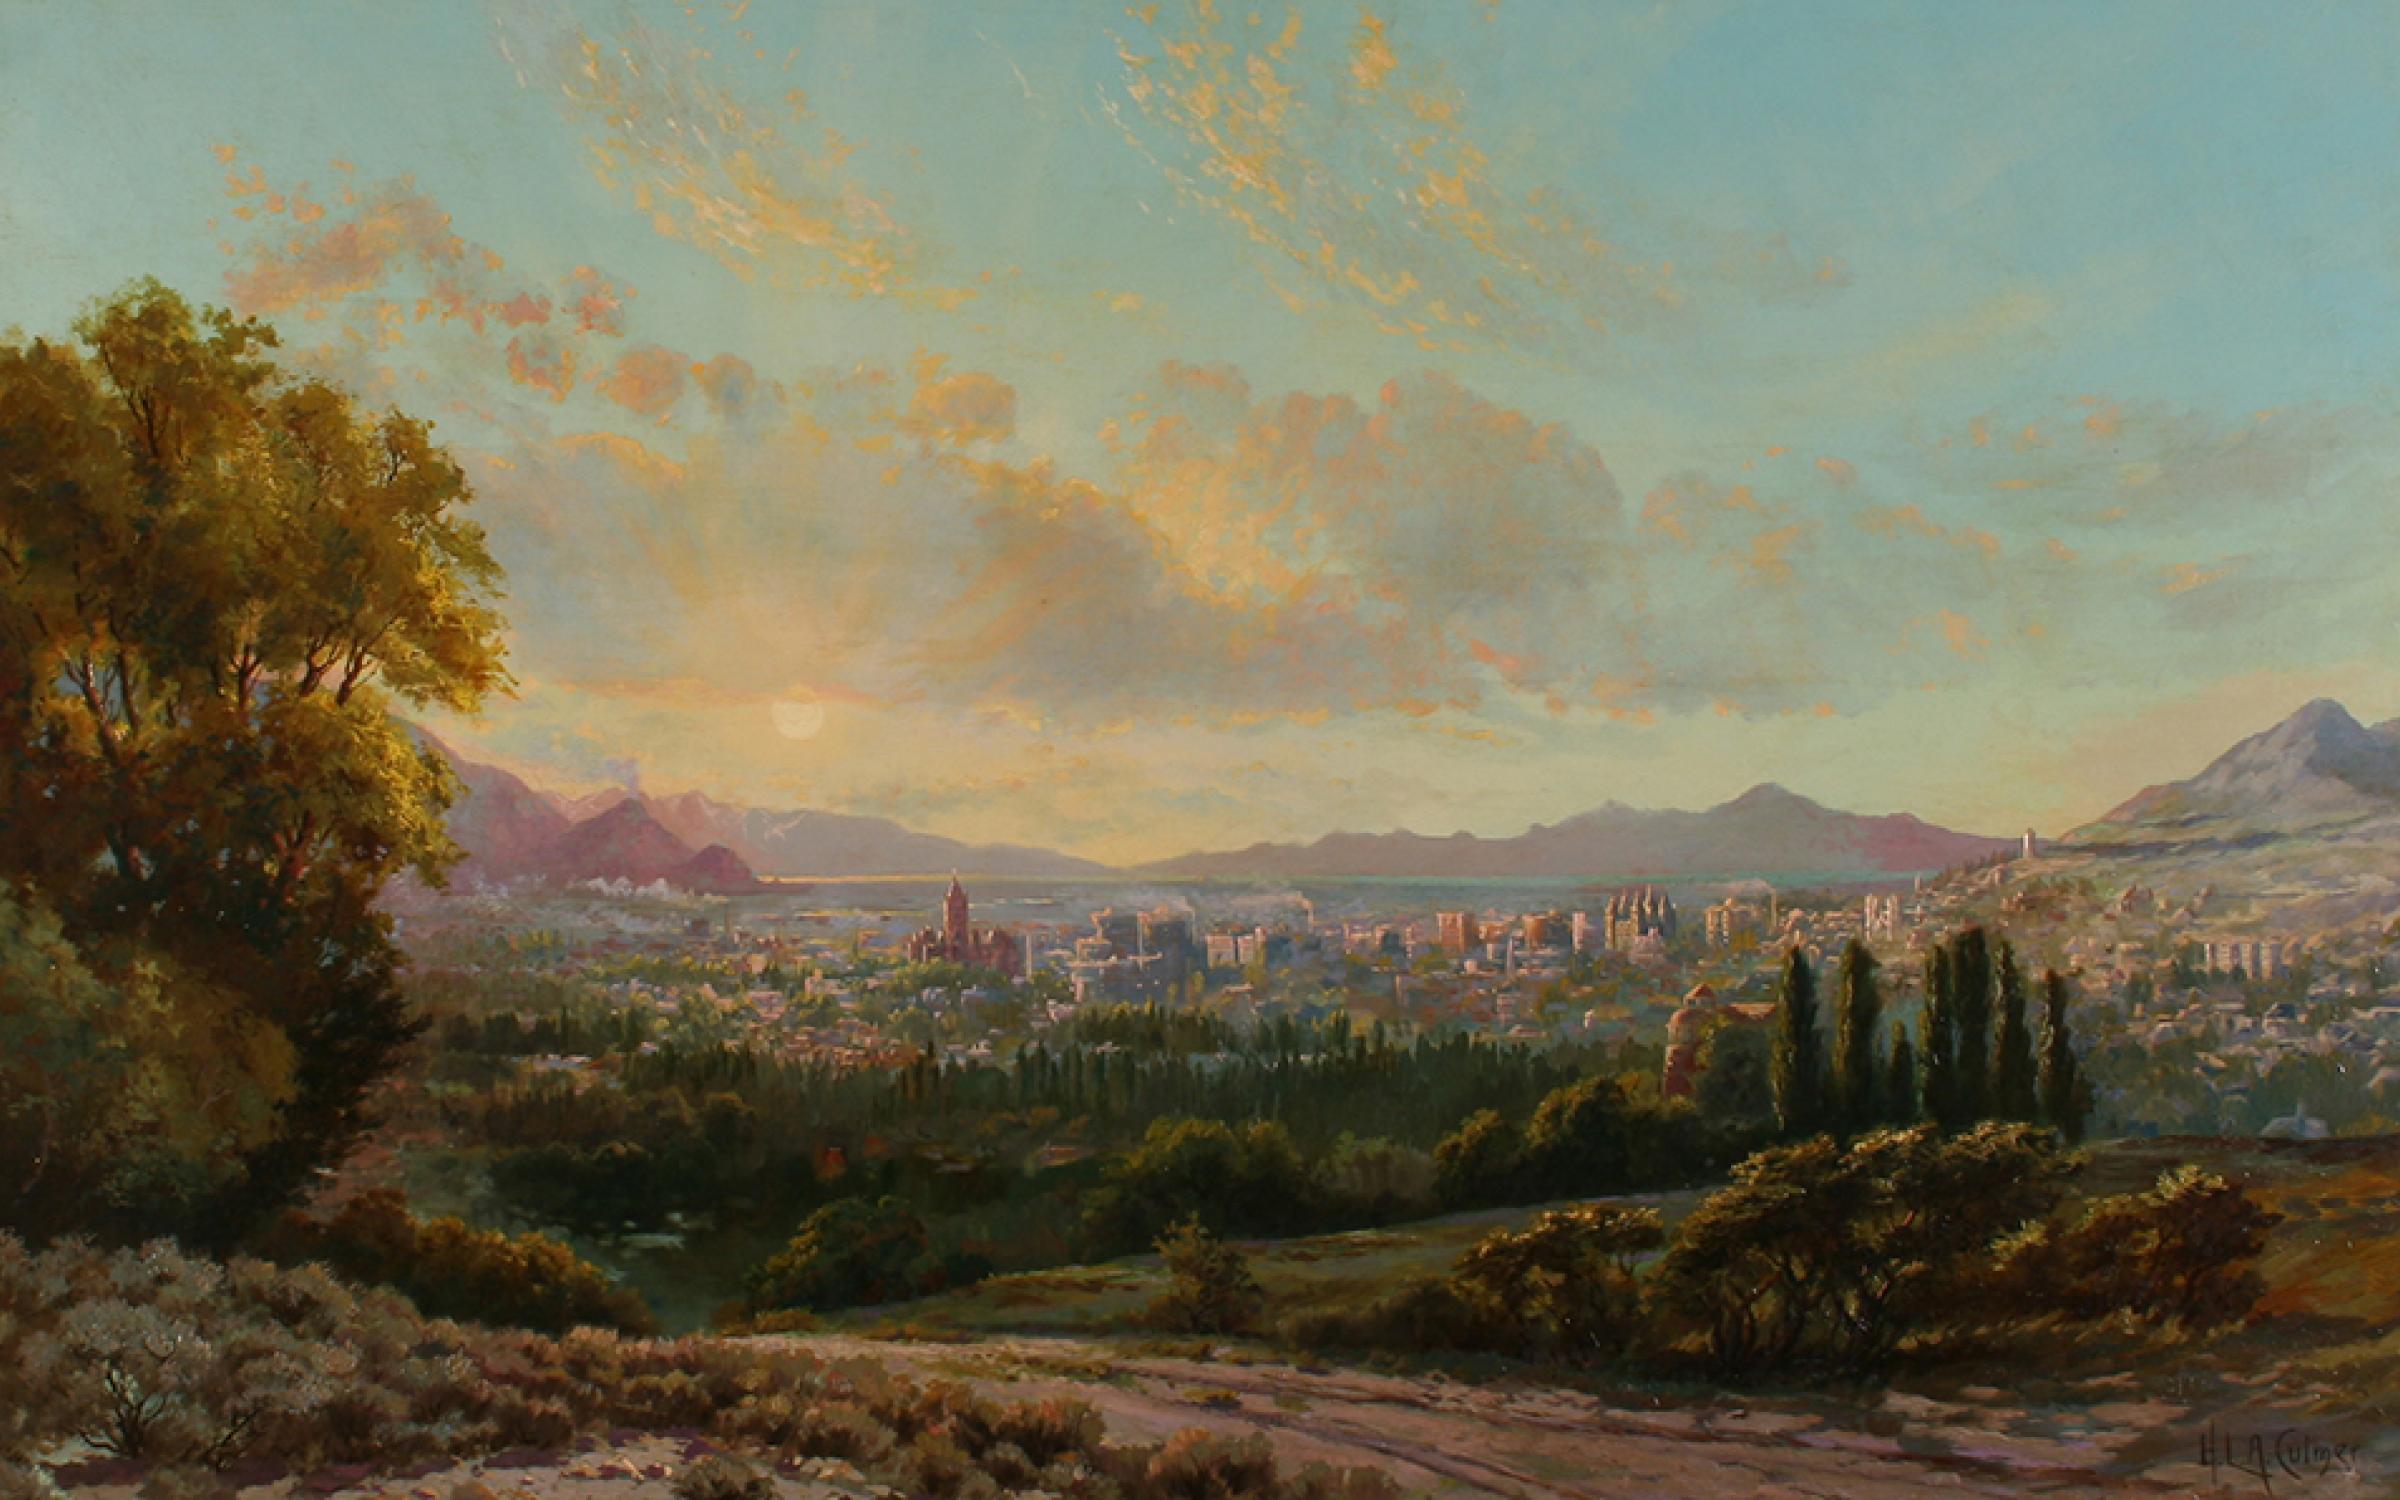 Henry L.A. Culmer, (American, 1854-1914), View of Salt Lake Valley, ca. 1911-1914, oil on canvas, gift of Joseph J. Palmer, Wayne G. Petty, the heirs O. Wood Moyle III and James H. Harwood by exchange, UMFA2011.18.1